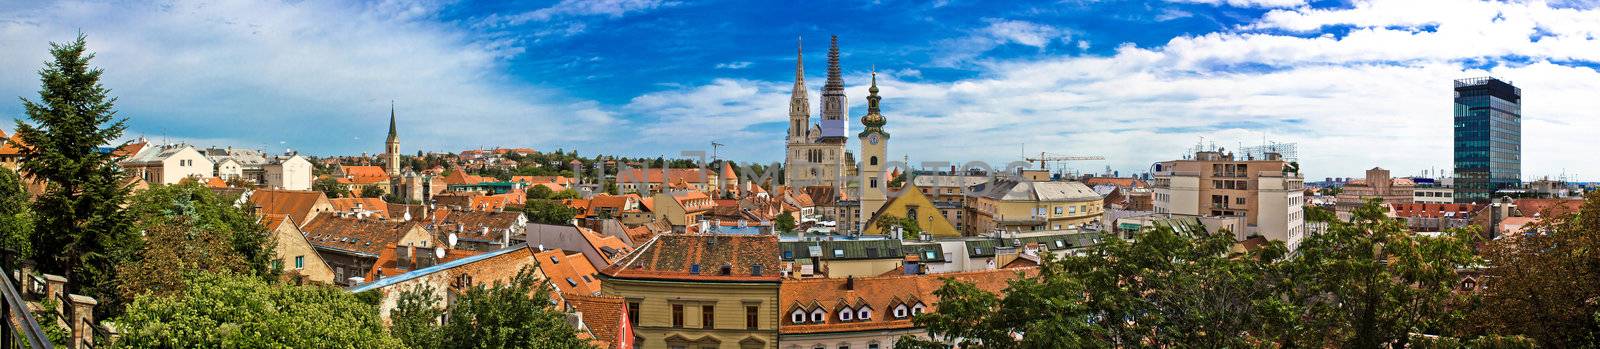 Zagreb cityscape panoramic view at old town center by xbrchx